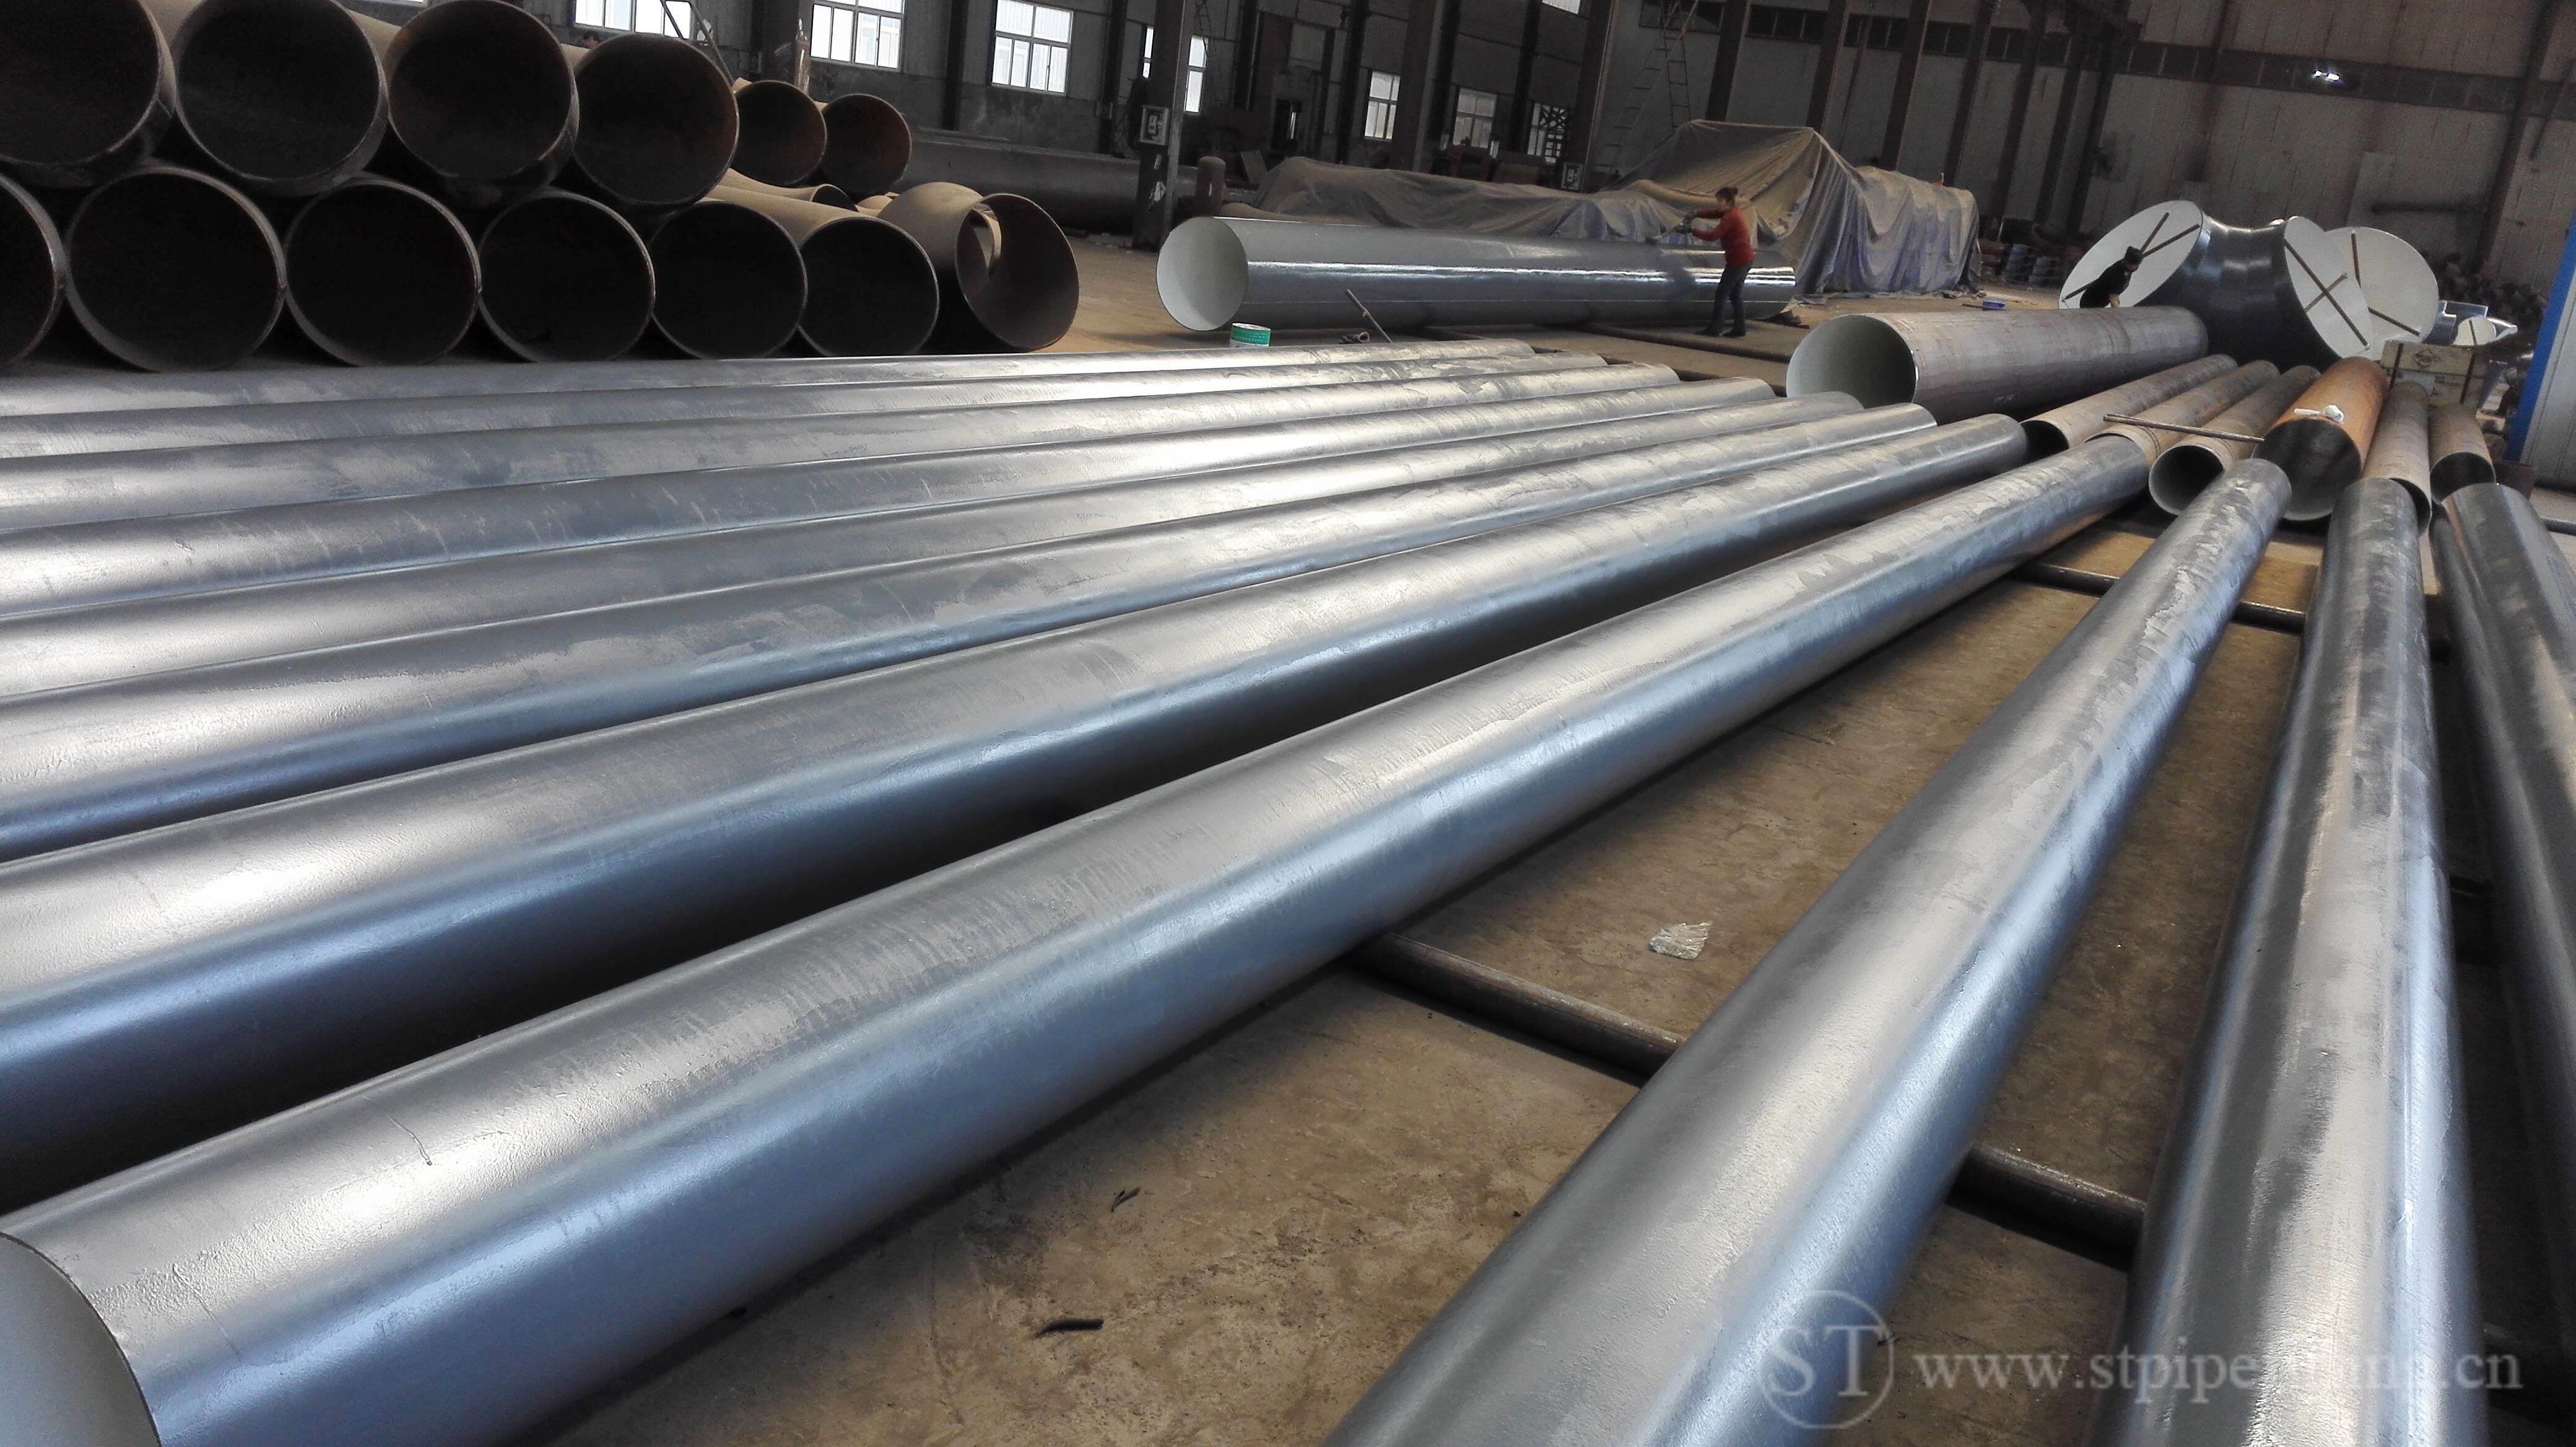 Prefabricated piping